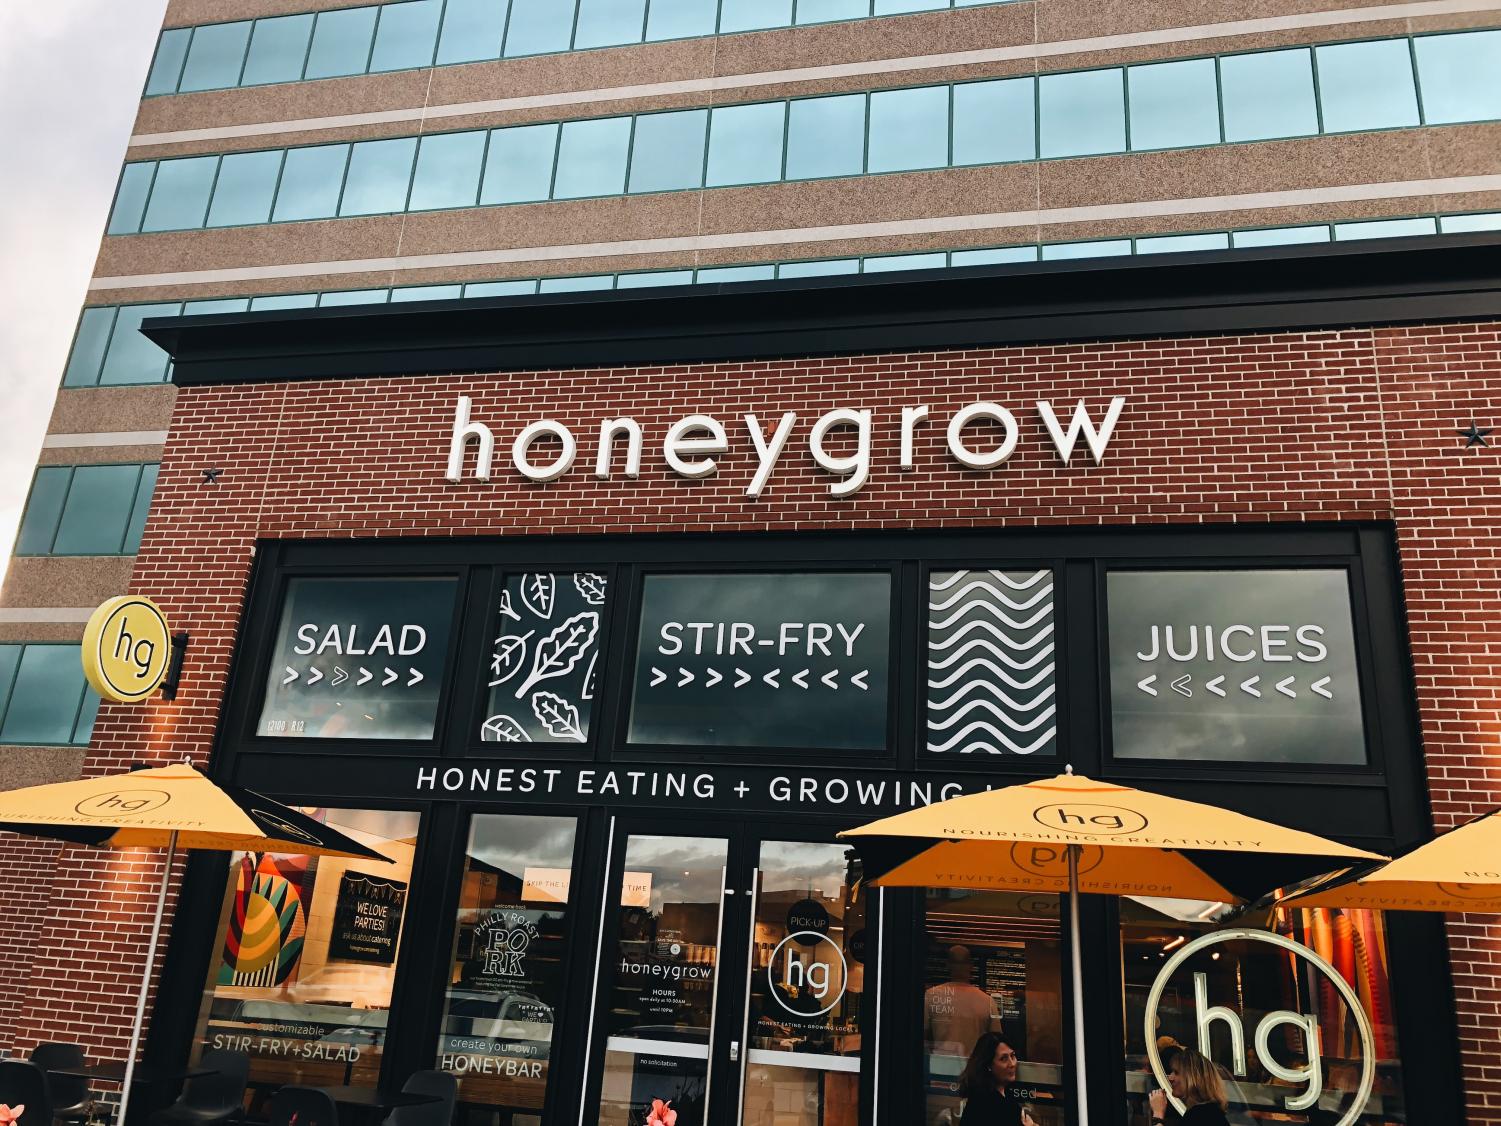 Honeygrow has an aesthetic setup which matches the theme with the restauran...